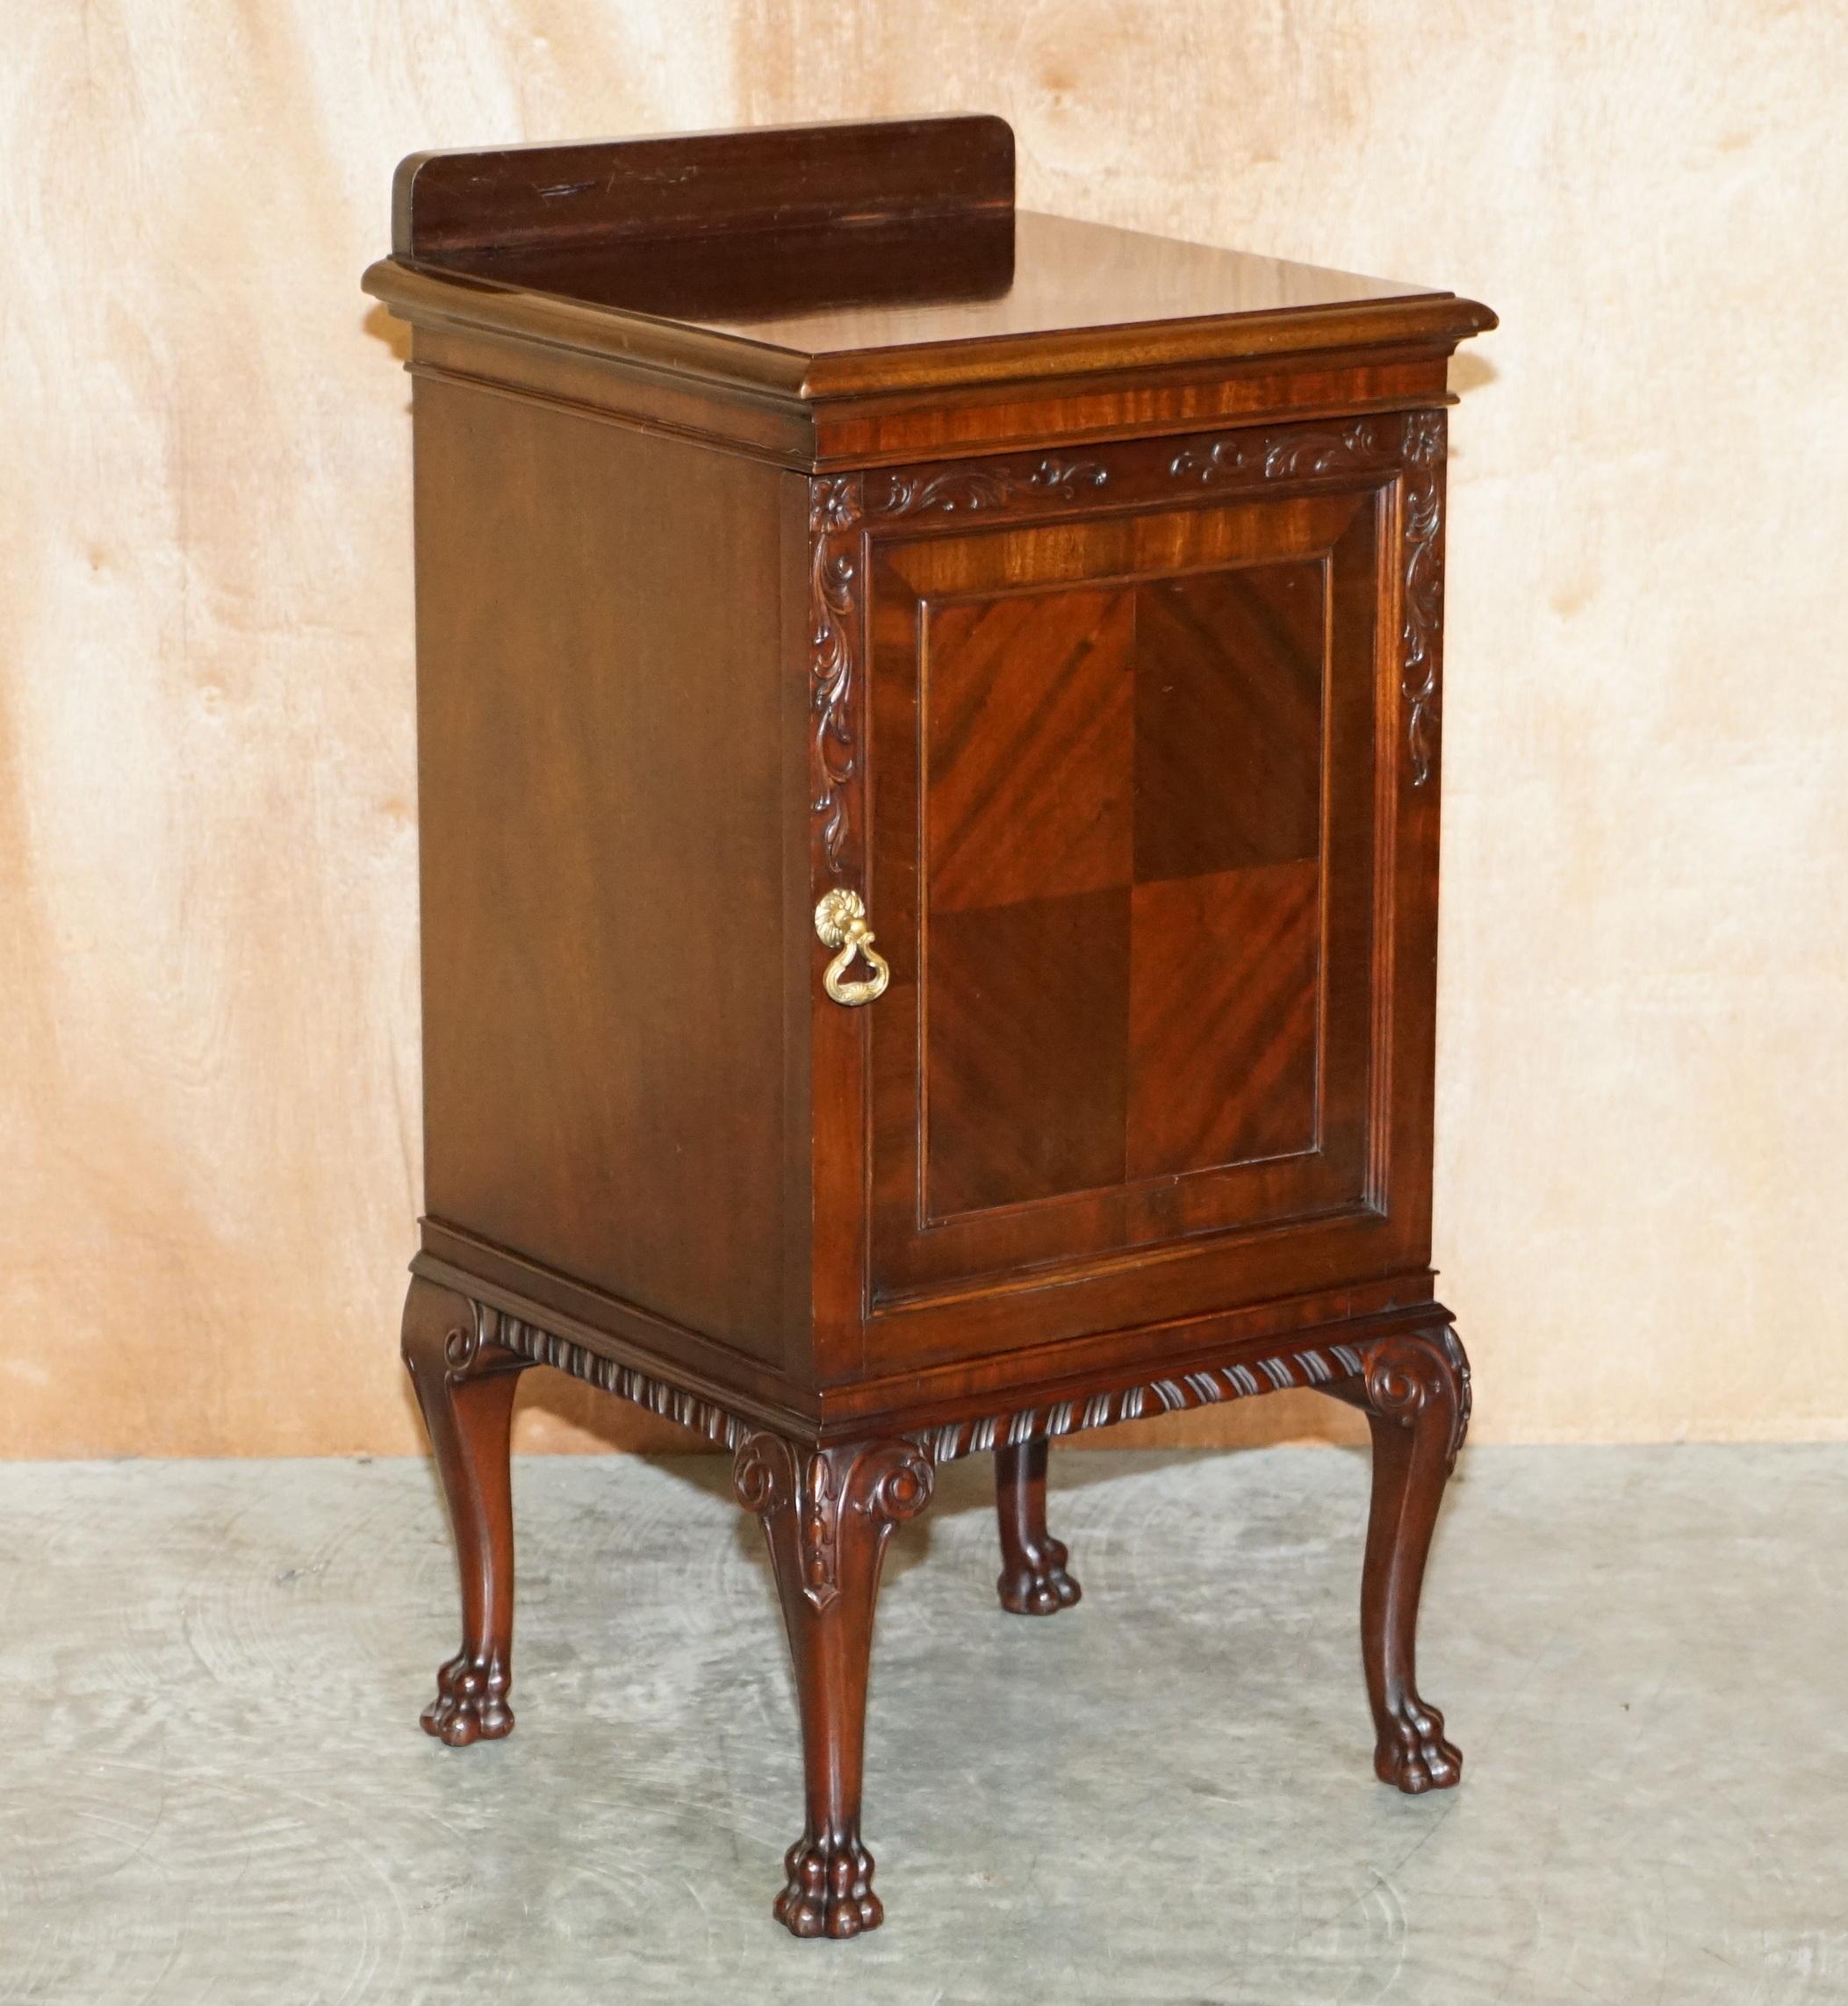 We are delighted to offer for sale this exquisite quality circa 1900 Mahogany side table with lion hairy paw feet

This piece is part of a large suite, I have in total a pair of occasional chairs, a large triple bank wardrobe with campaign drawers